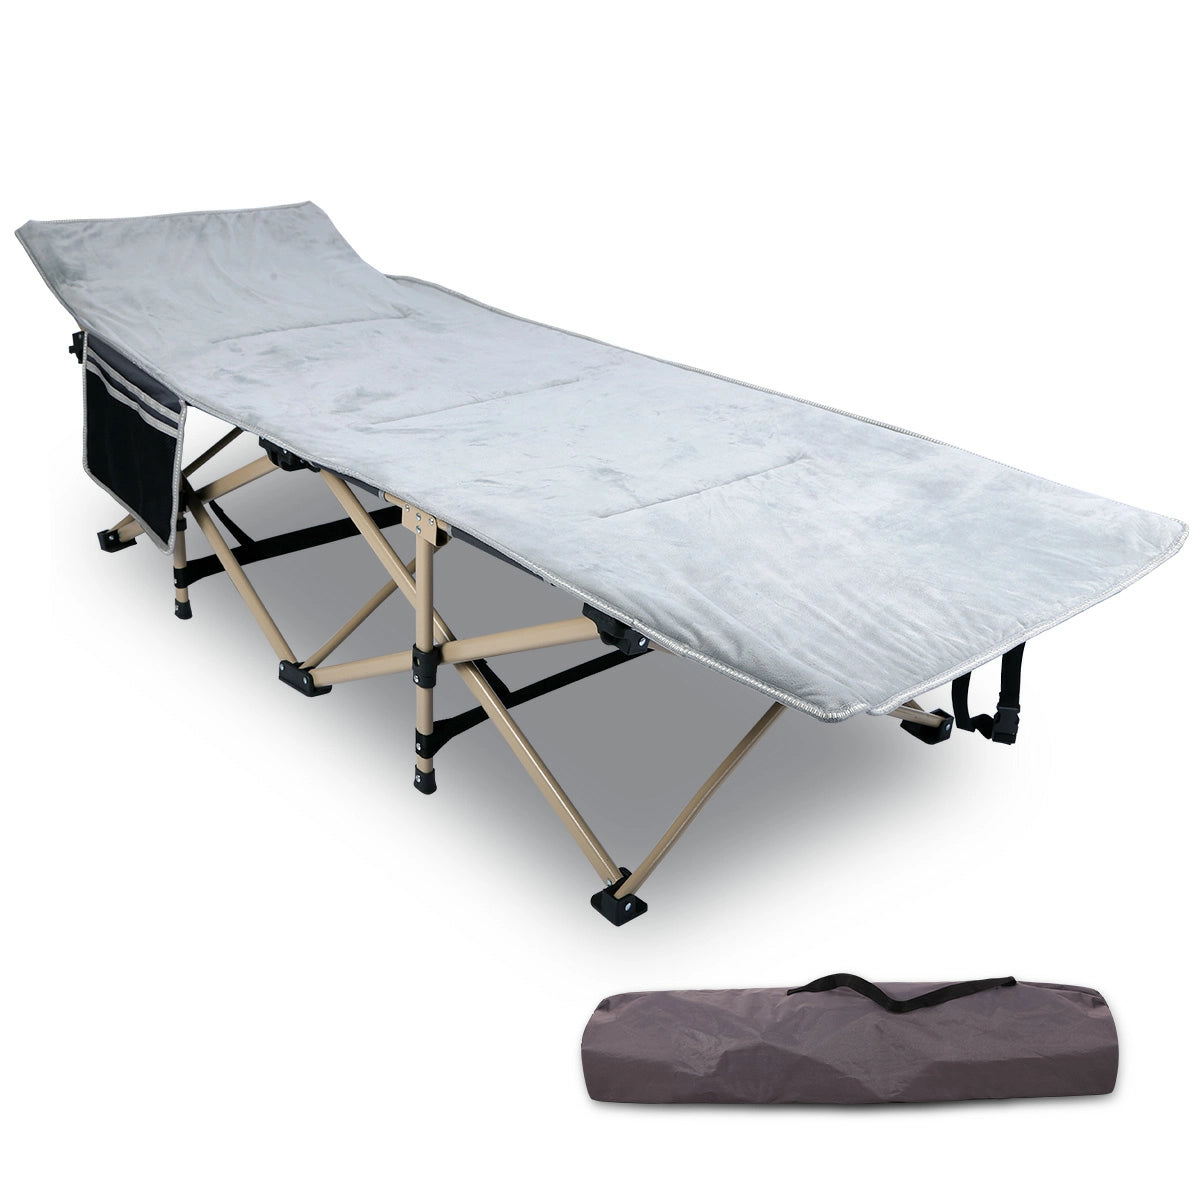 Padded Folding Camping Cot for Adults, Blue Grey